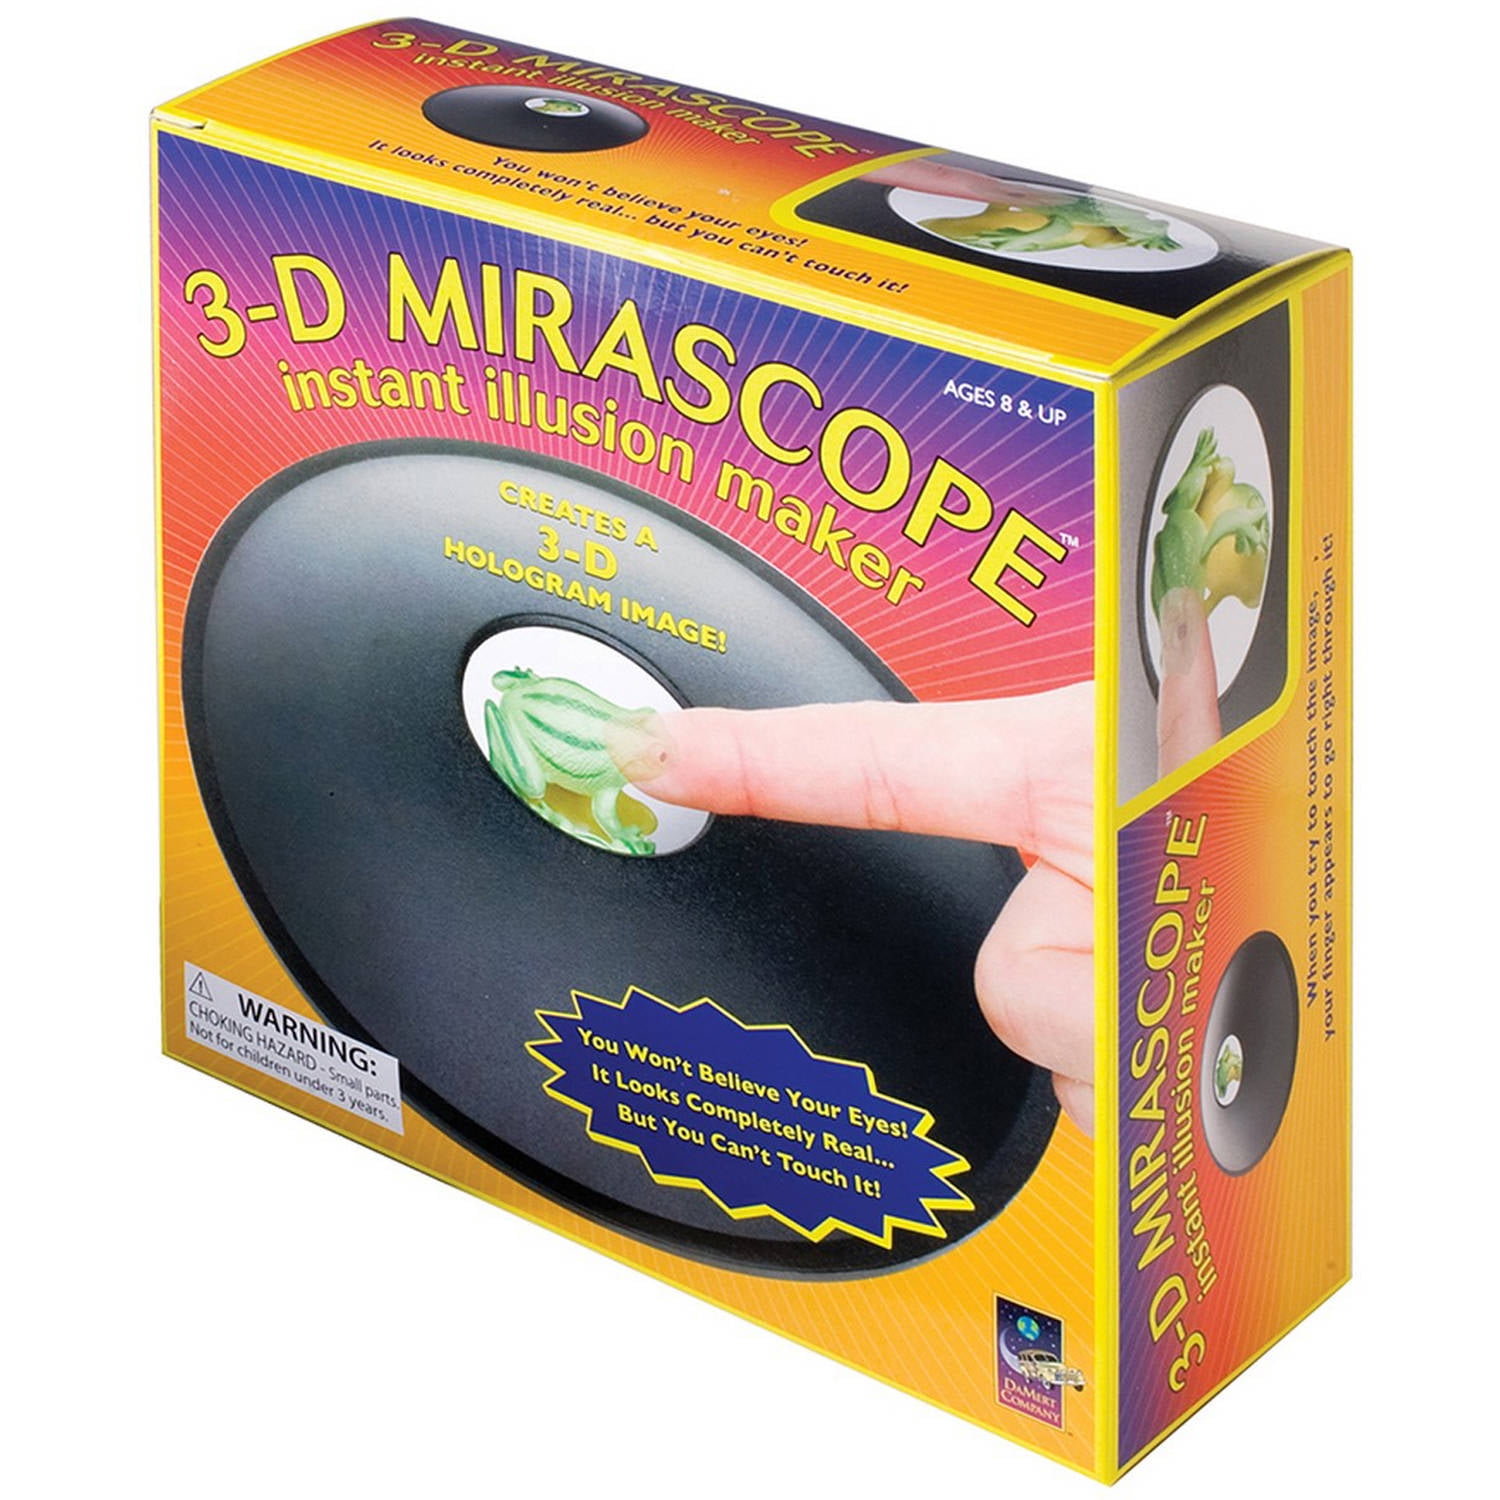 Toysmith 3-d Mirascope 3d Holographic Projection 6 Inch Illusion for sale online 